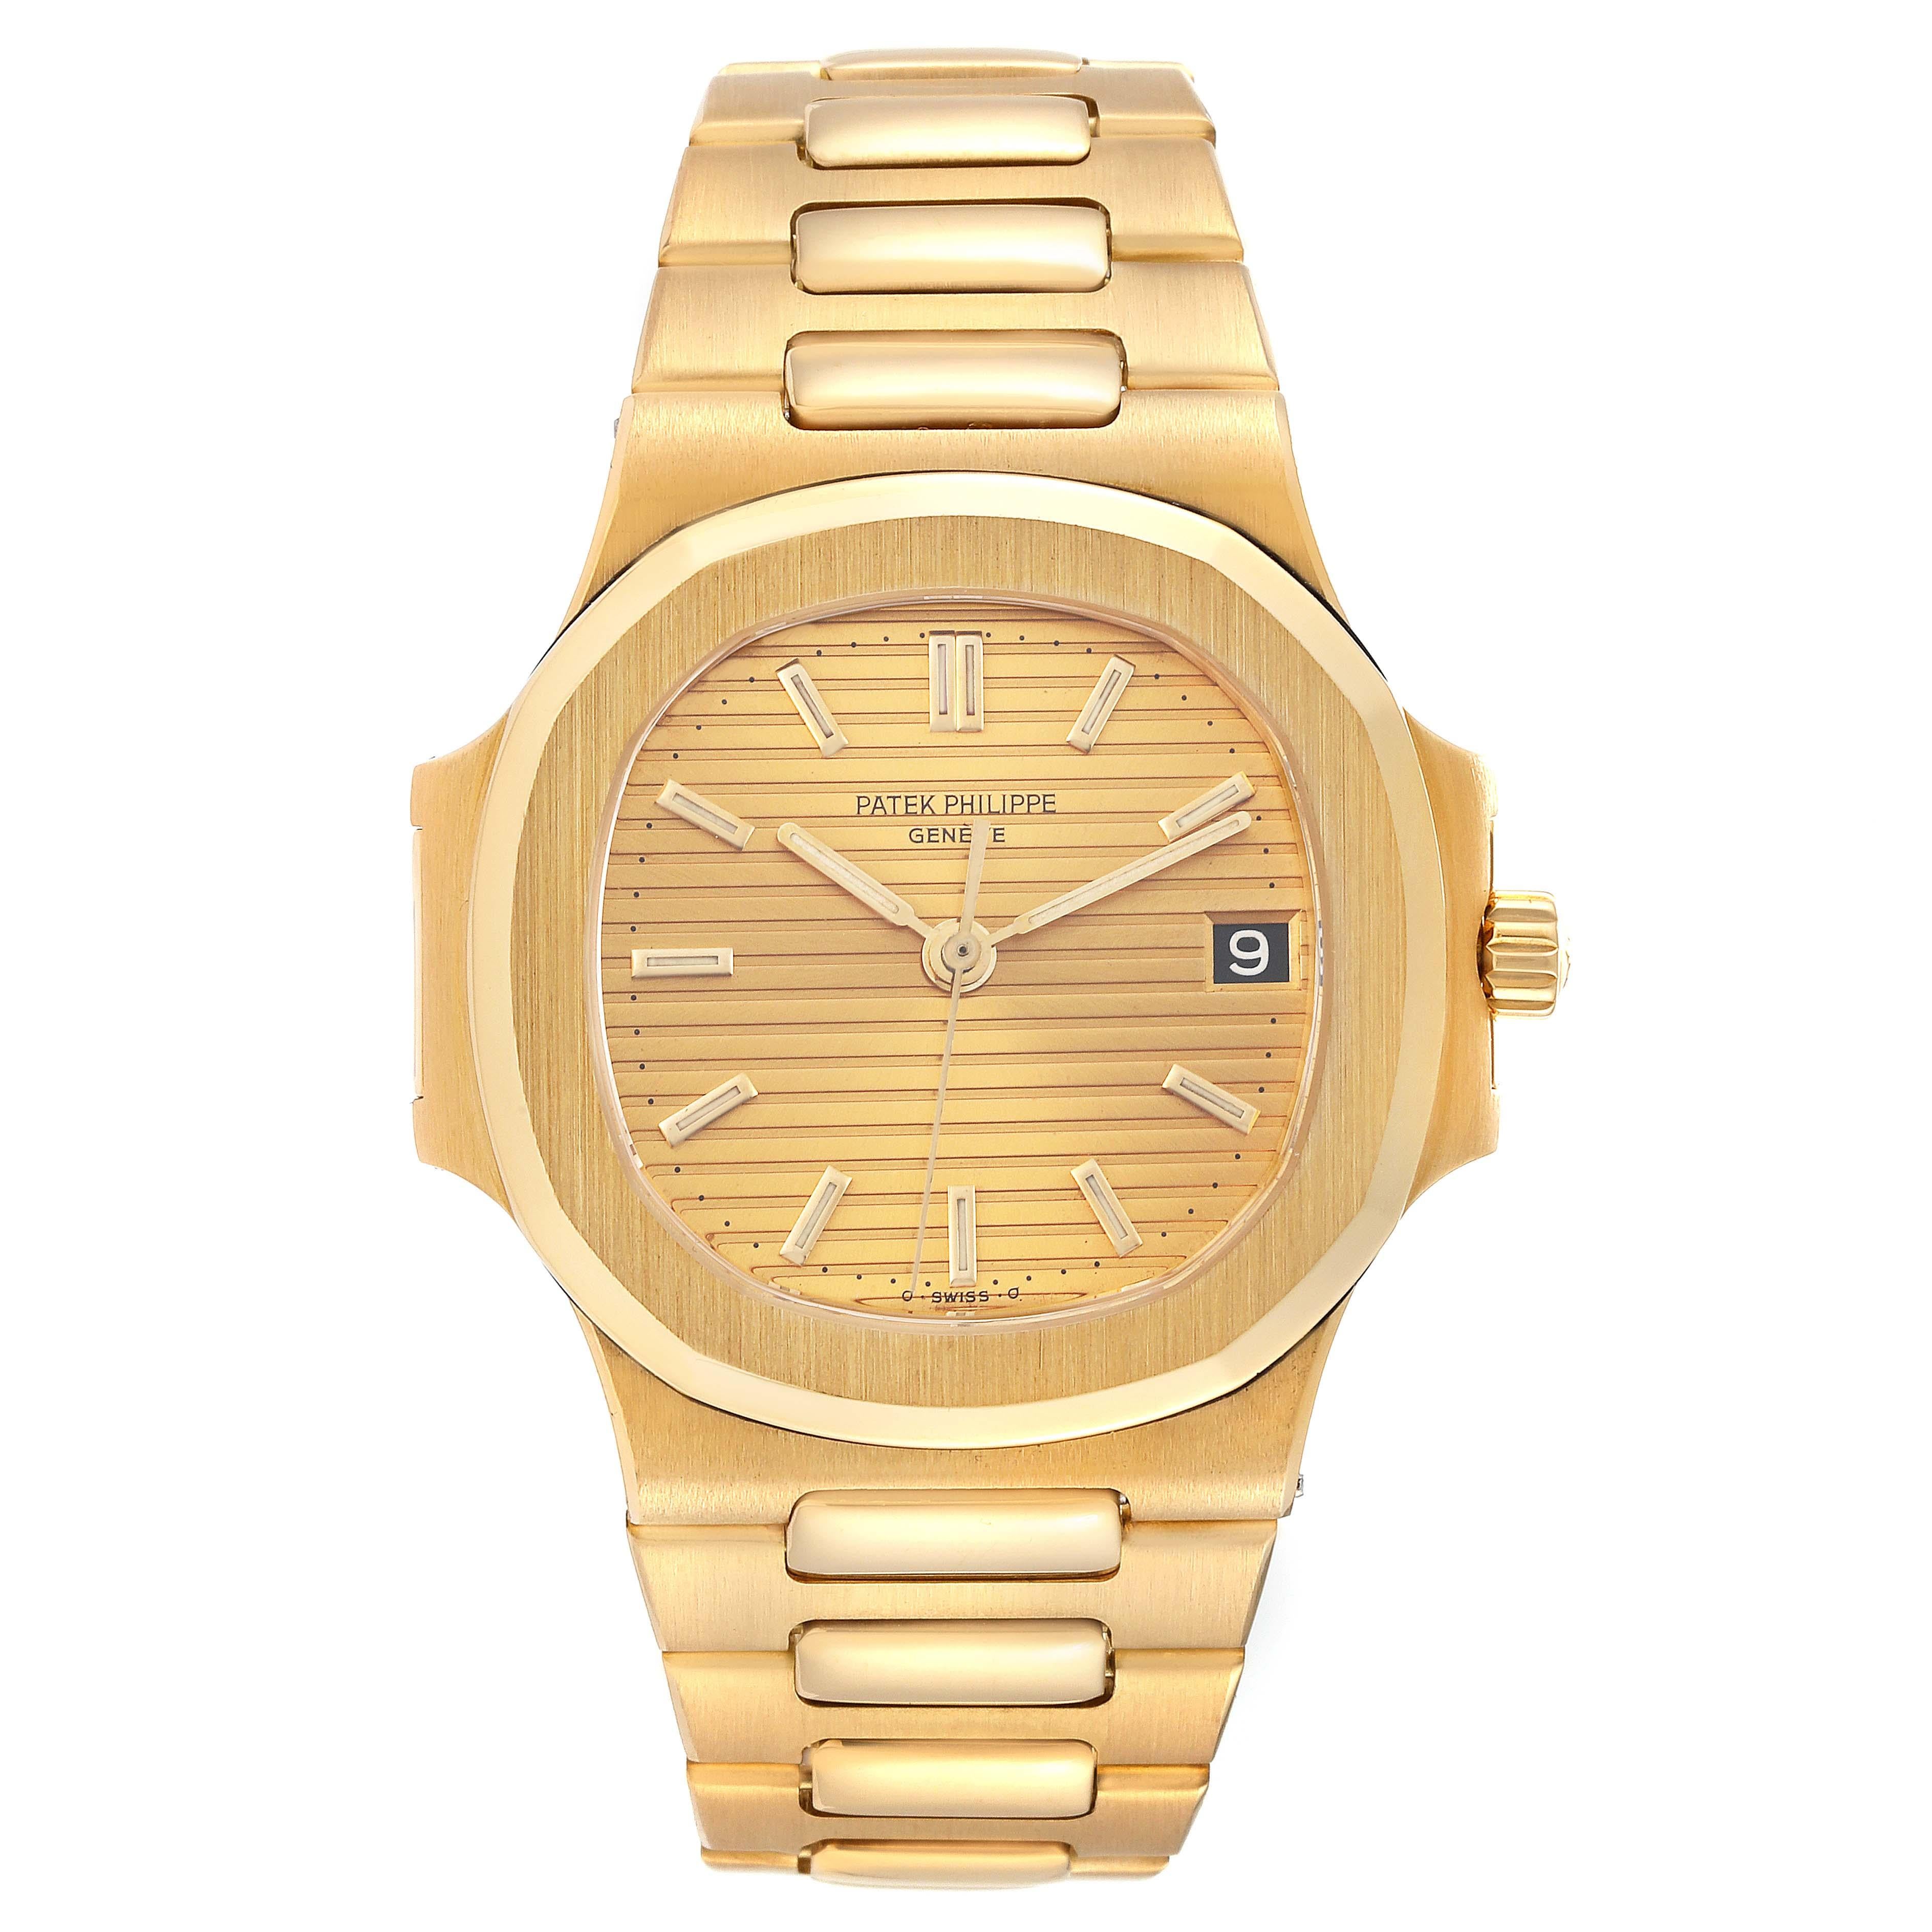 Patek Philippe Nautilus Yellow Gold Champagne Dial Mens Watch 3800 Box Papers. Automatic self-winding movement. 18k yellow gold coushion shape case 37.5 mm. 18k yellow gold bezel. Scratch resistant sapphire crystal. Champagne ridged dial with